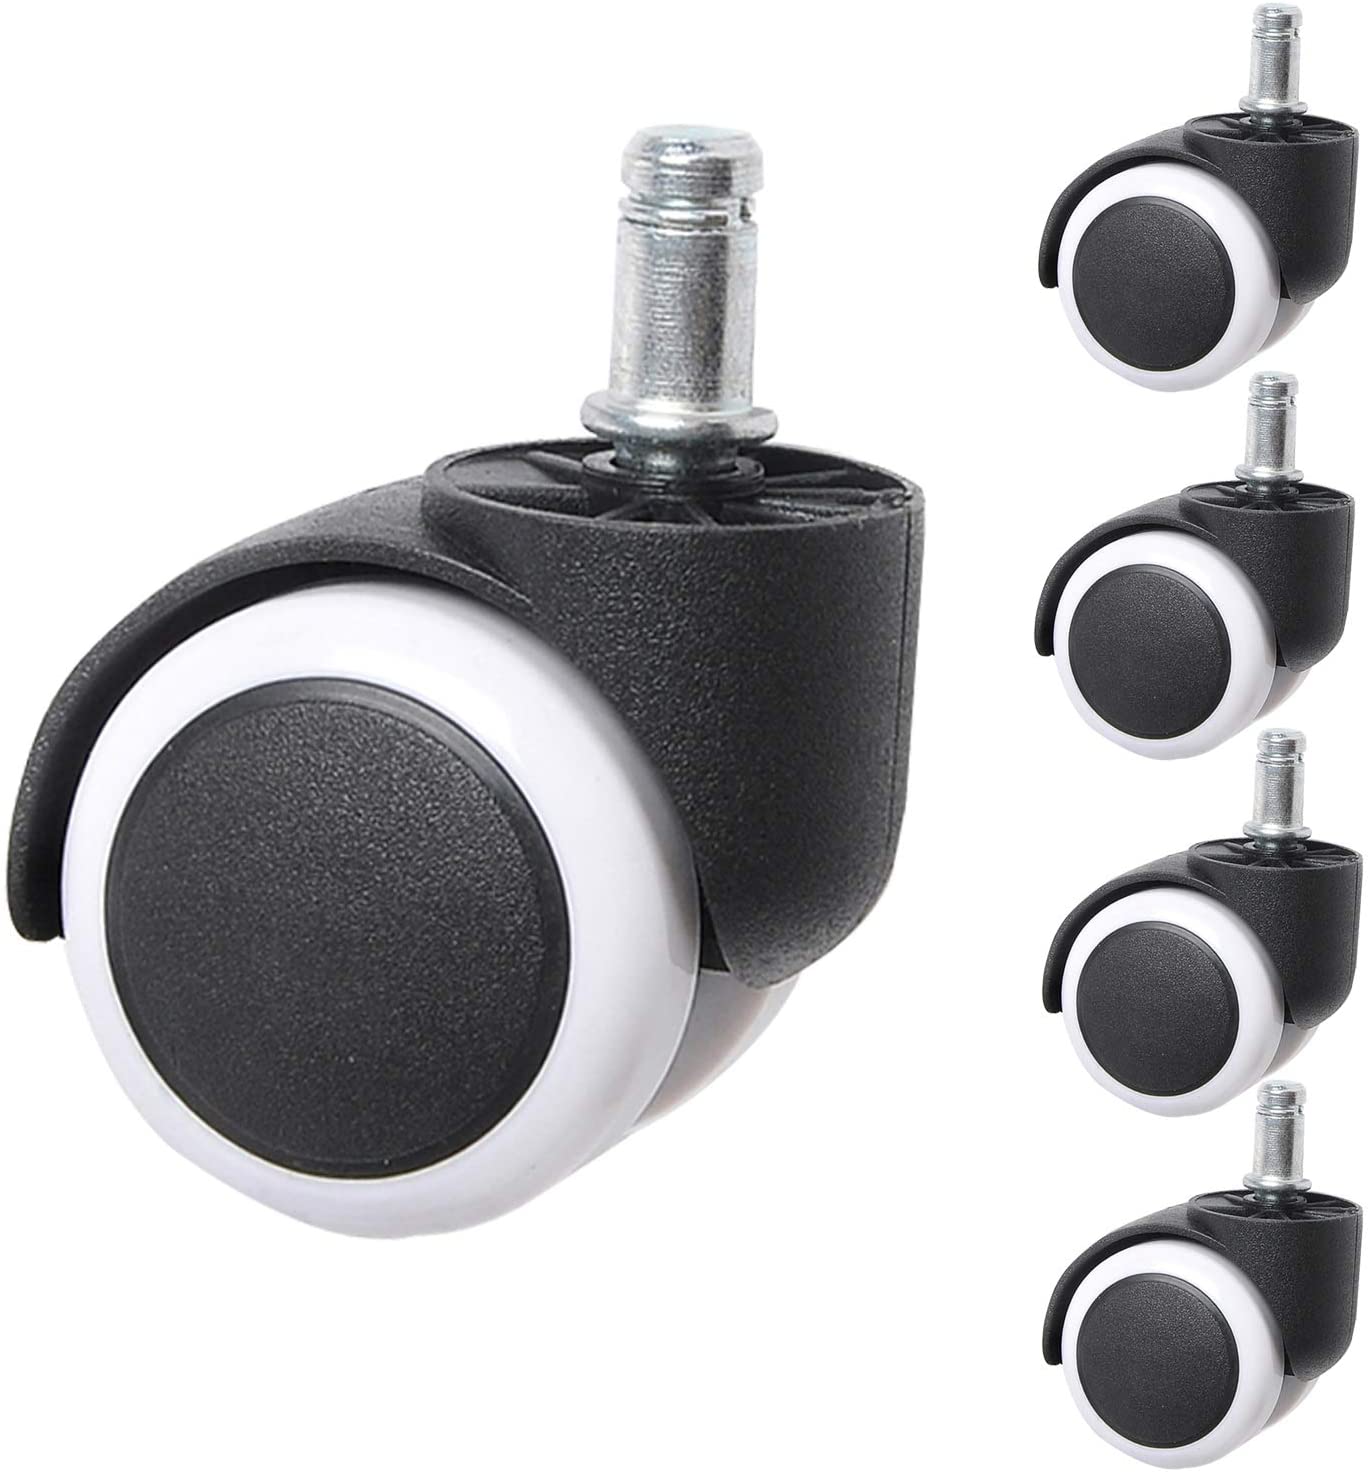 Home Office Chair Casters Wheels Replacement, Set of 5 (Black/White). - e4cents